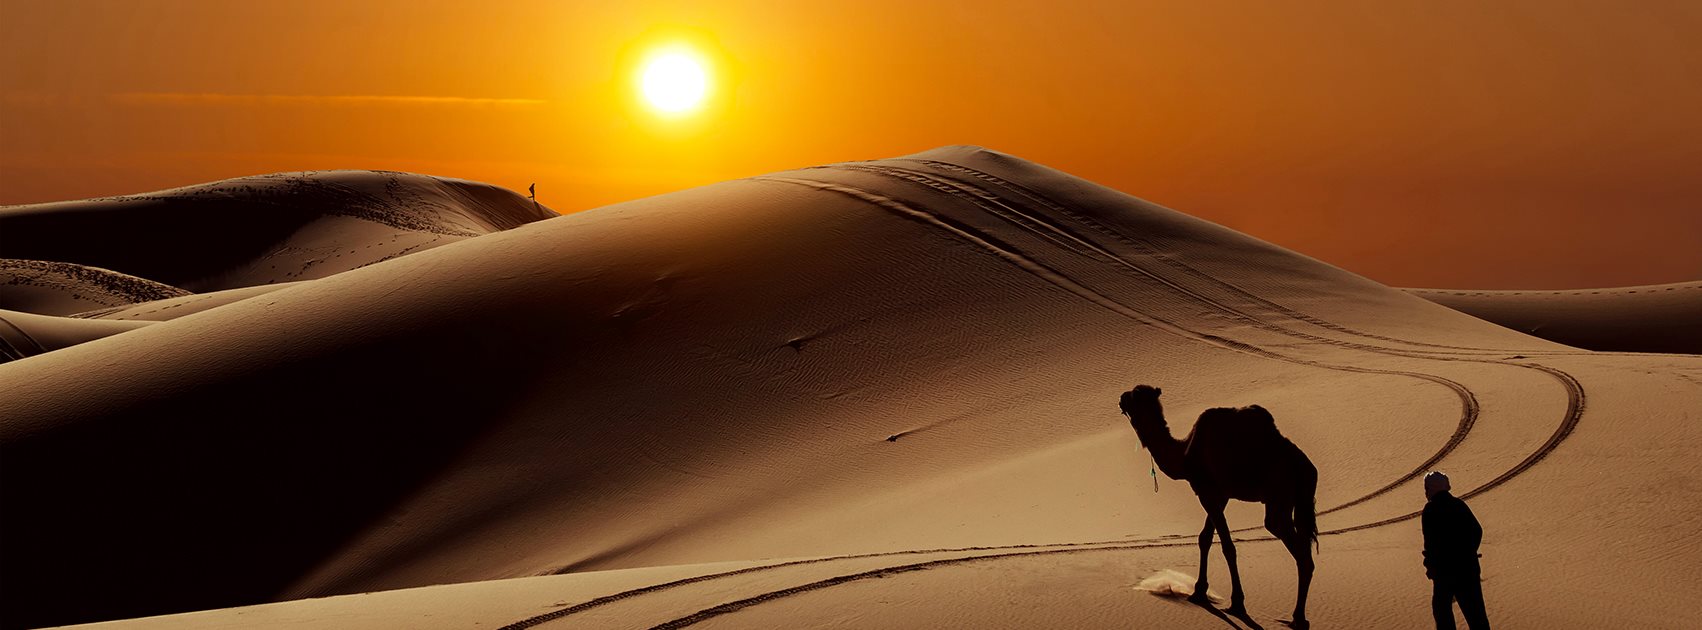 View of camel and bedouins in the desert at sunset - credits Oasis Festival - Oasis Festival 2023 - Lineupping.com